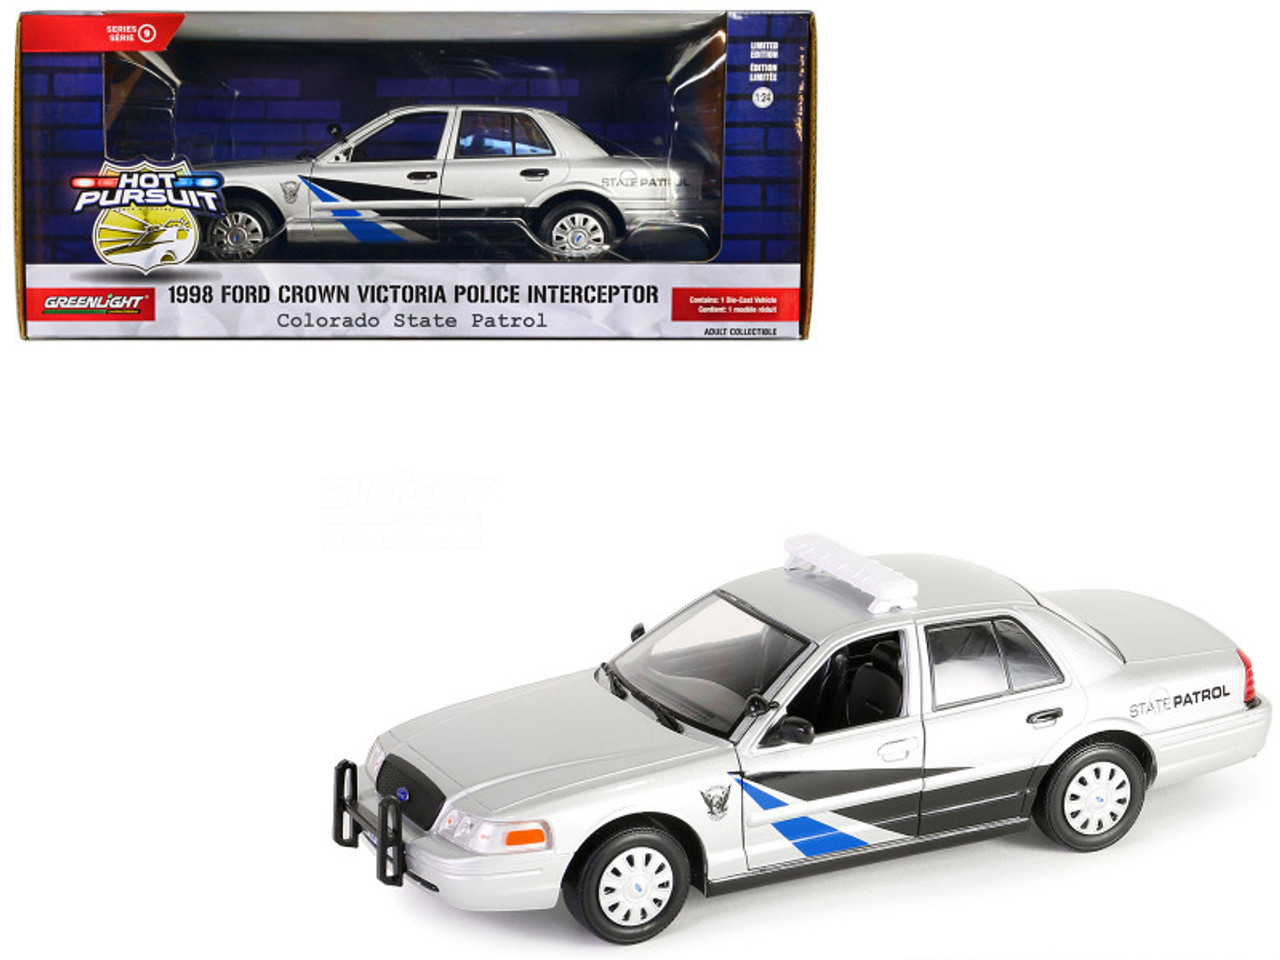 1998 Ford Crown Victoria Police Interceptor Silver Metallic "Colorado State Patrol" "Hot Pursuit" Series 9 1/24 Diecast Model Car by Greenlight